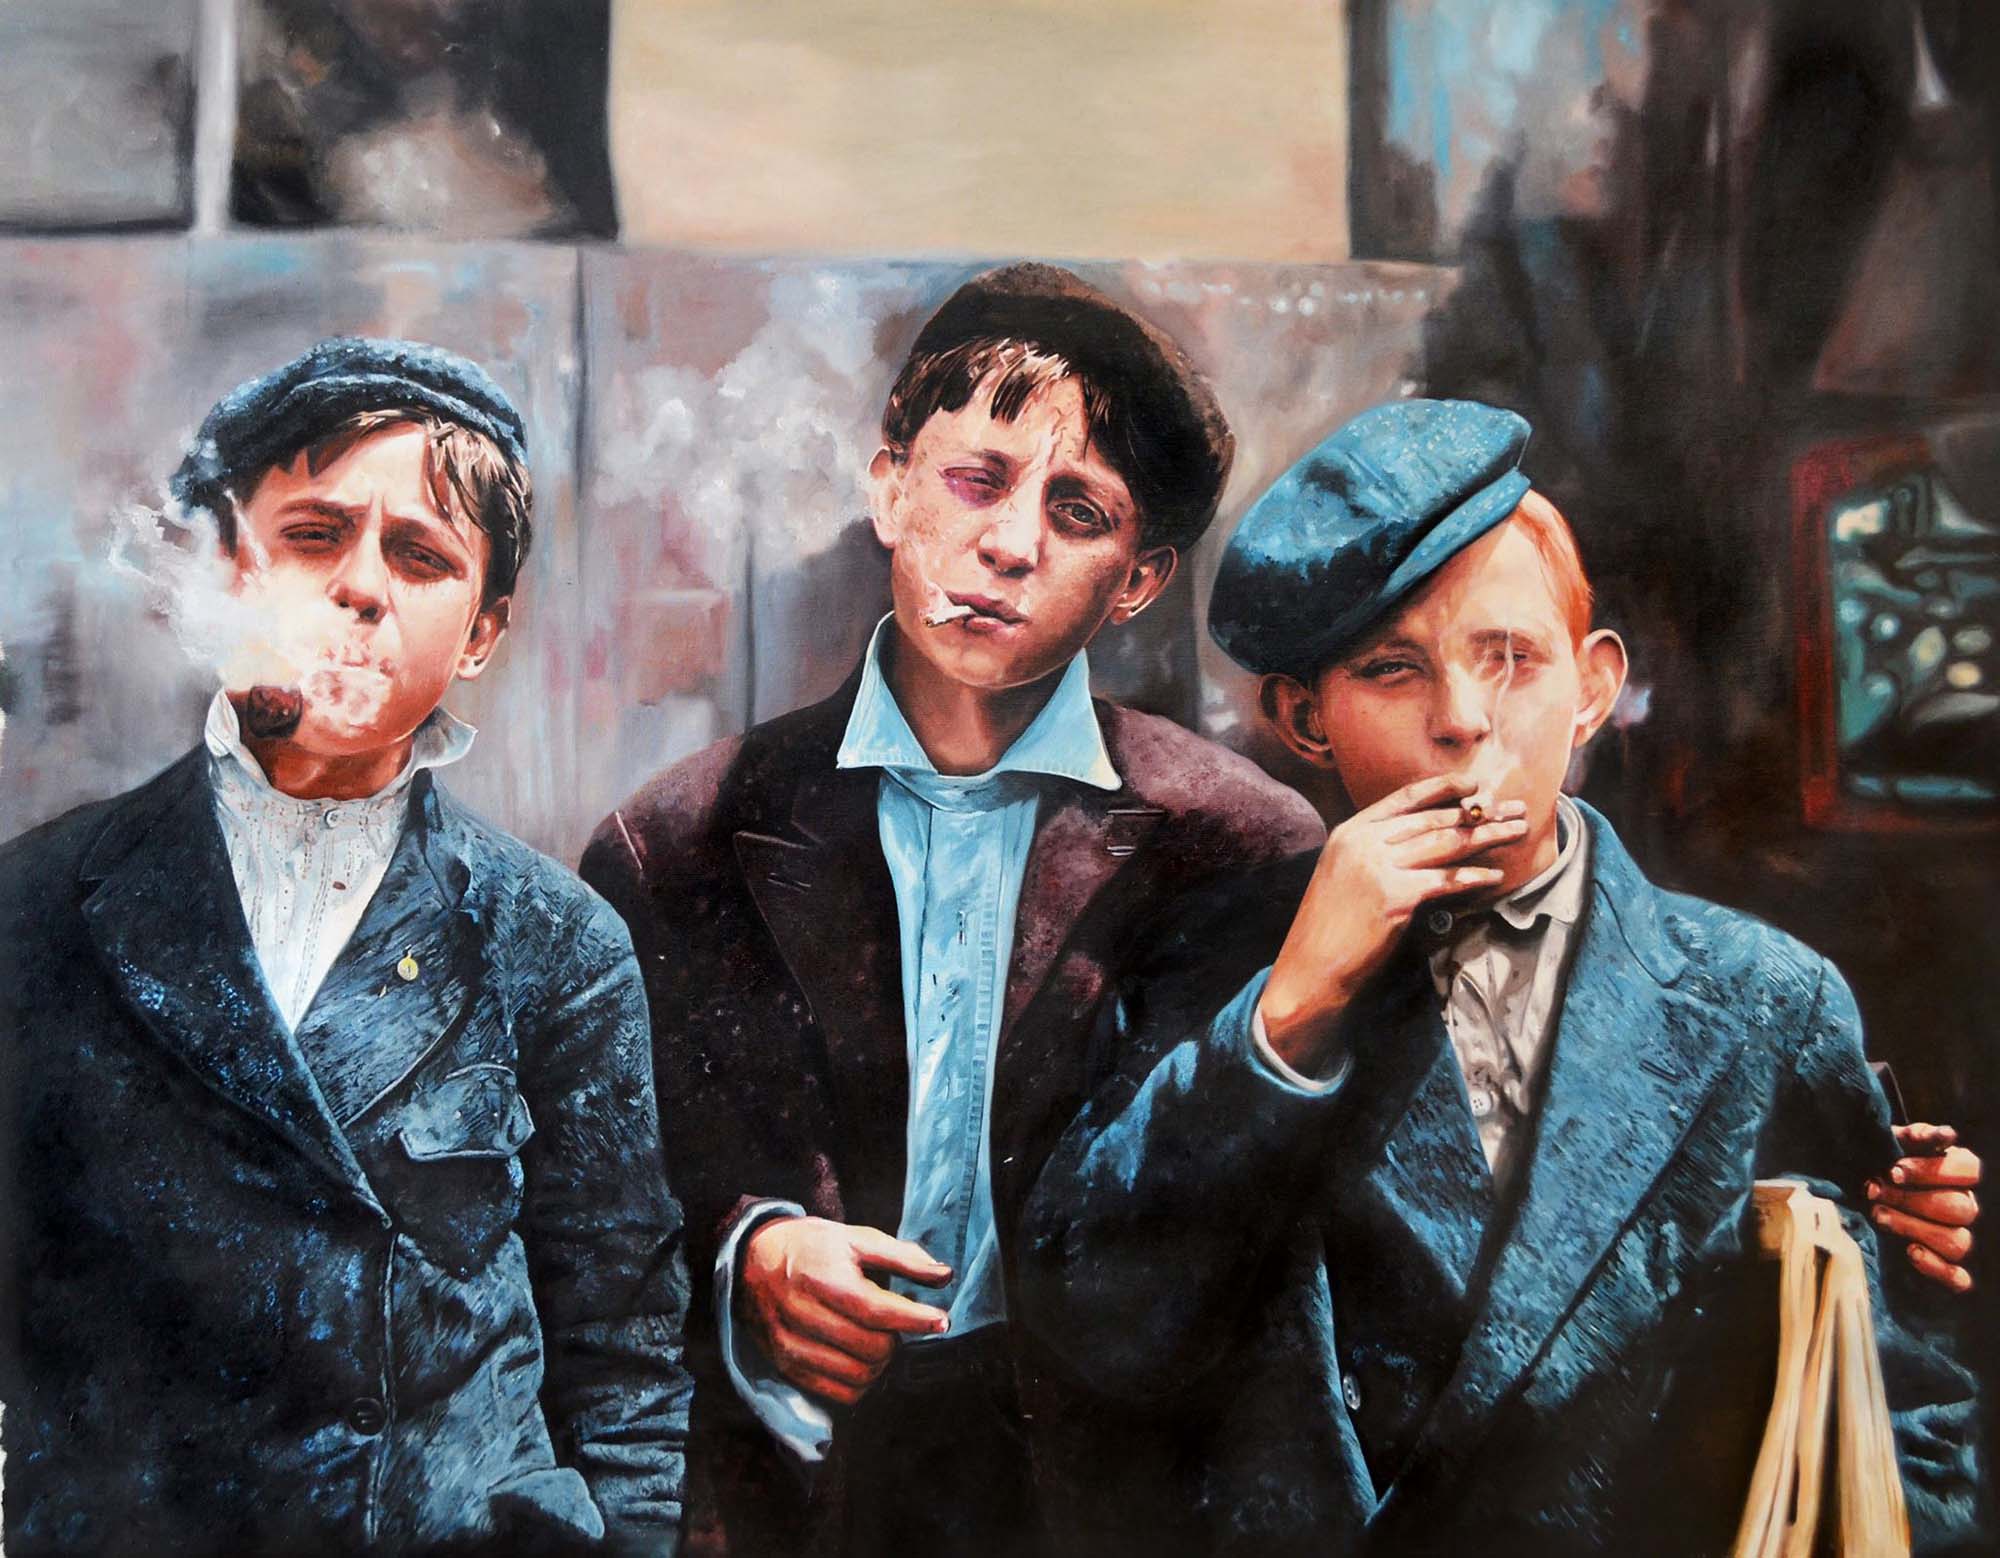 Oil painting on canvas by Marek Pękacz of Lewis Wickes Hine photos of "Newsies at Skeeter's Branch, Jefferson near Franklin, St. Louis." 

From the artist:

"With my painting I would like to make the photo vivid in colours, enliven the boys and eternalise their dreams. Think about the childhood that they hadn't experienced. Take into consideration those children, who now only a few hours flight from here, suffer anguish because of greed and profit.

"Child's labour is constantly common in many parts of the world, according to statistics by UNICEF, there are around 150,000,000 working children in 2019.

"Watching the black and white photo of Lewis Hine, I saw young boys in men's poses, smoking cigarettes, full of dreams, fighting hunger and poverty every day.

"I wanted to revive these boys and immortalize their dreams."